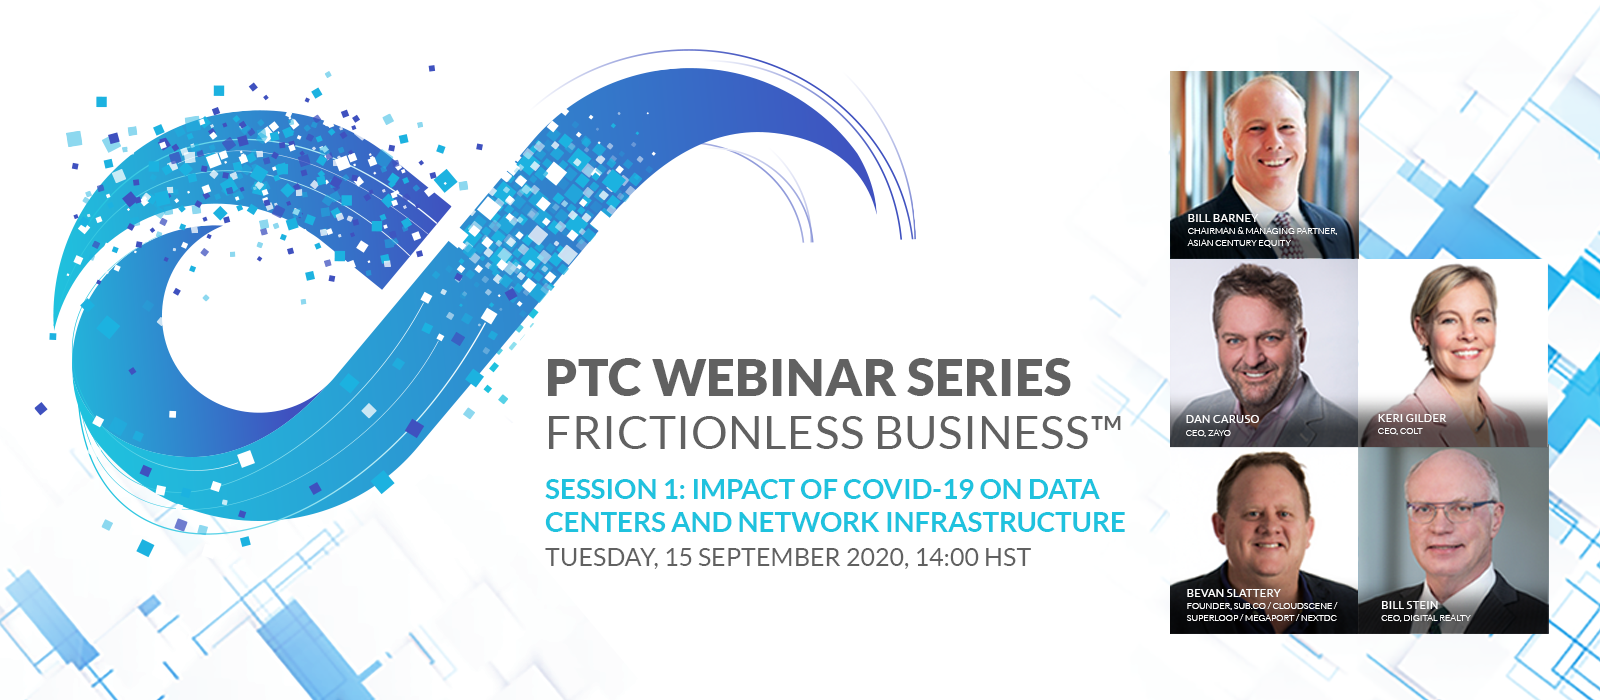 Frictionless Business - Webinar Series Session 1